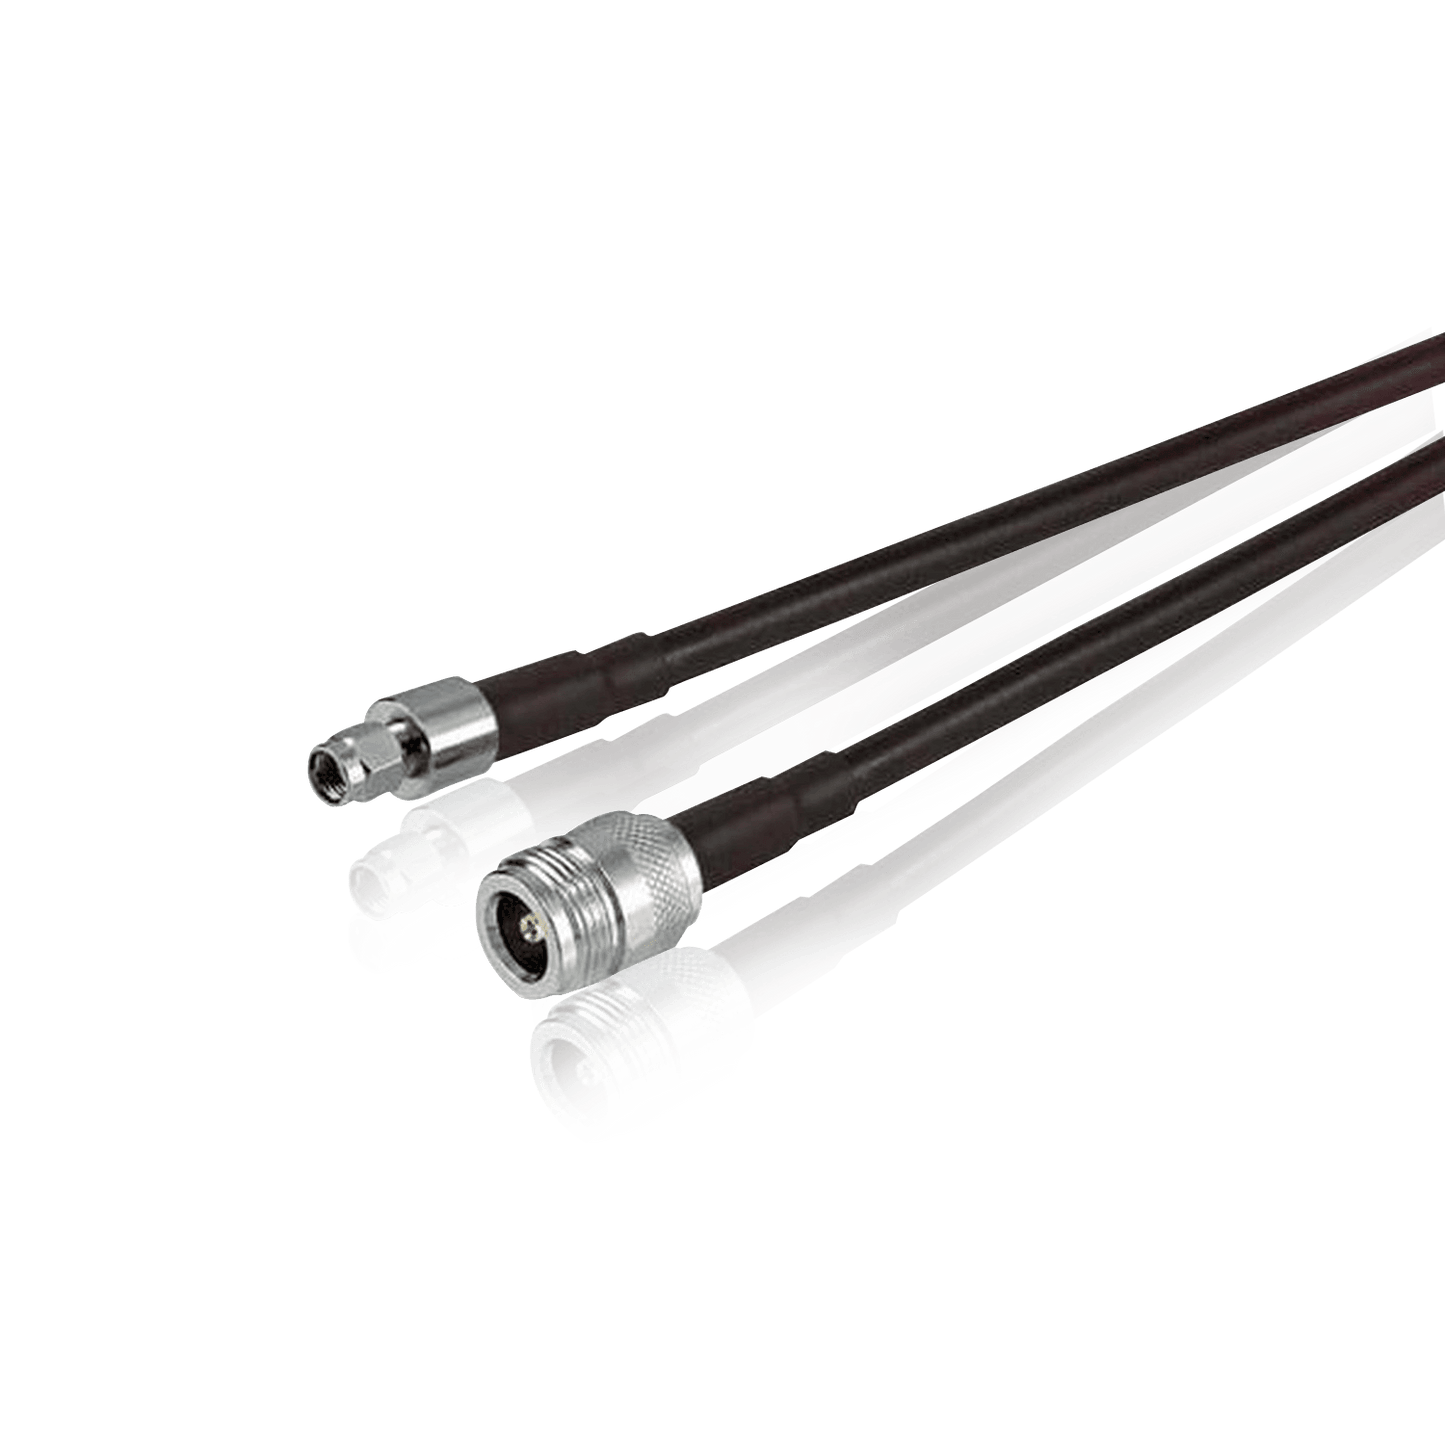 LMR-600 Coaxial Cable - N Female - RP SMA Male - Mapping Network